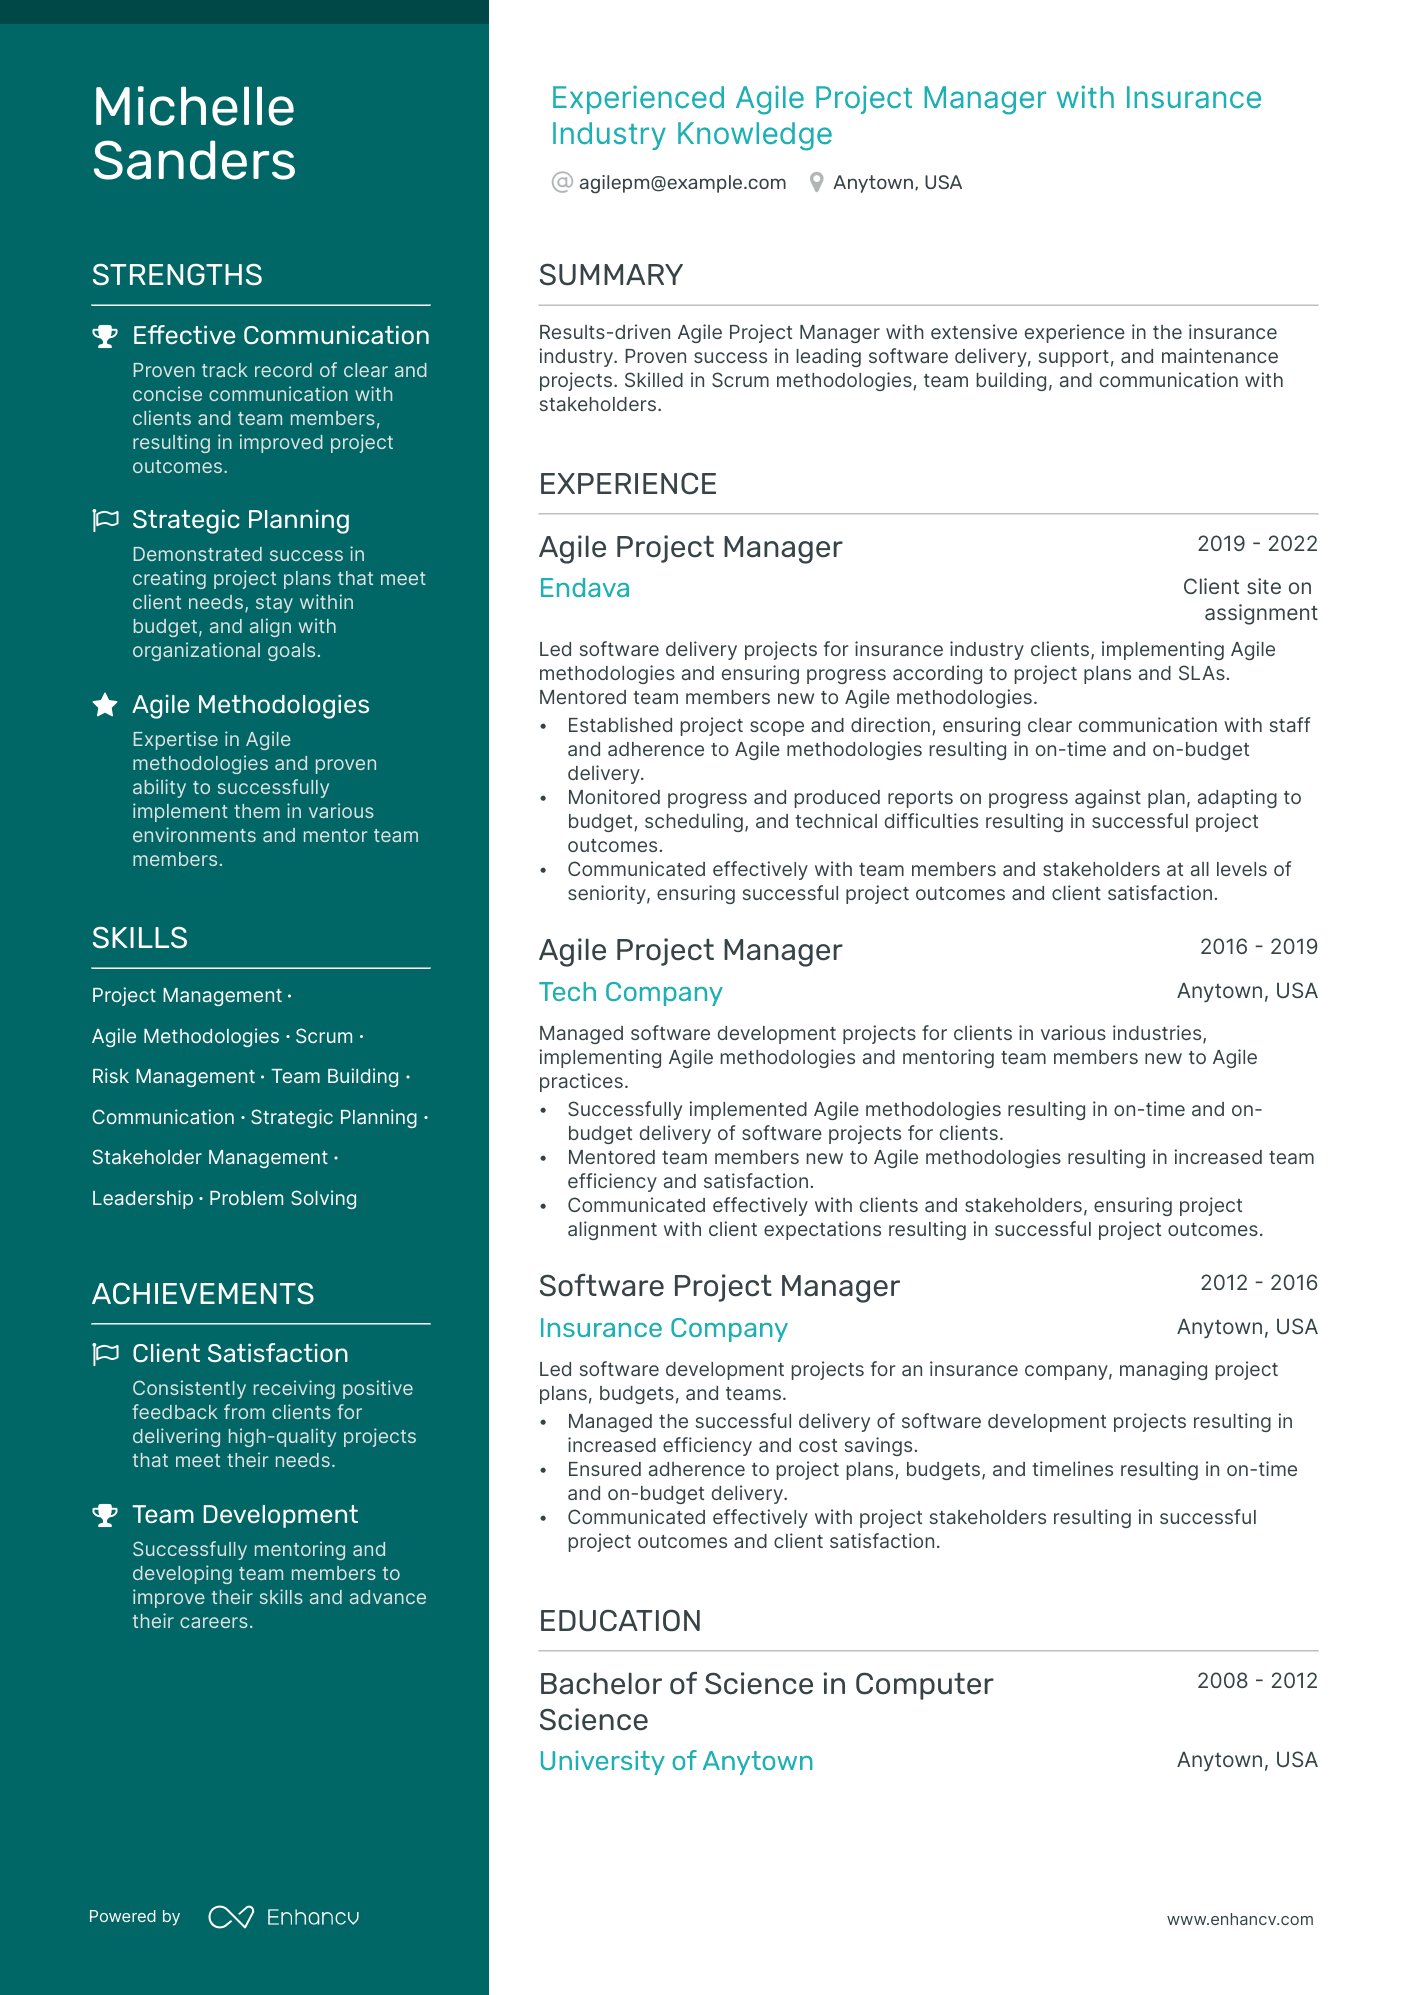 Agile Project Manager resume example